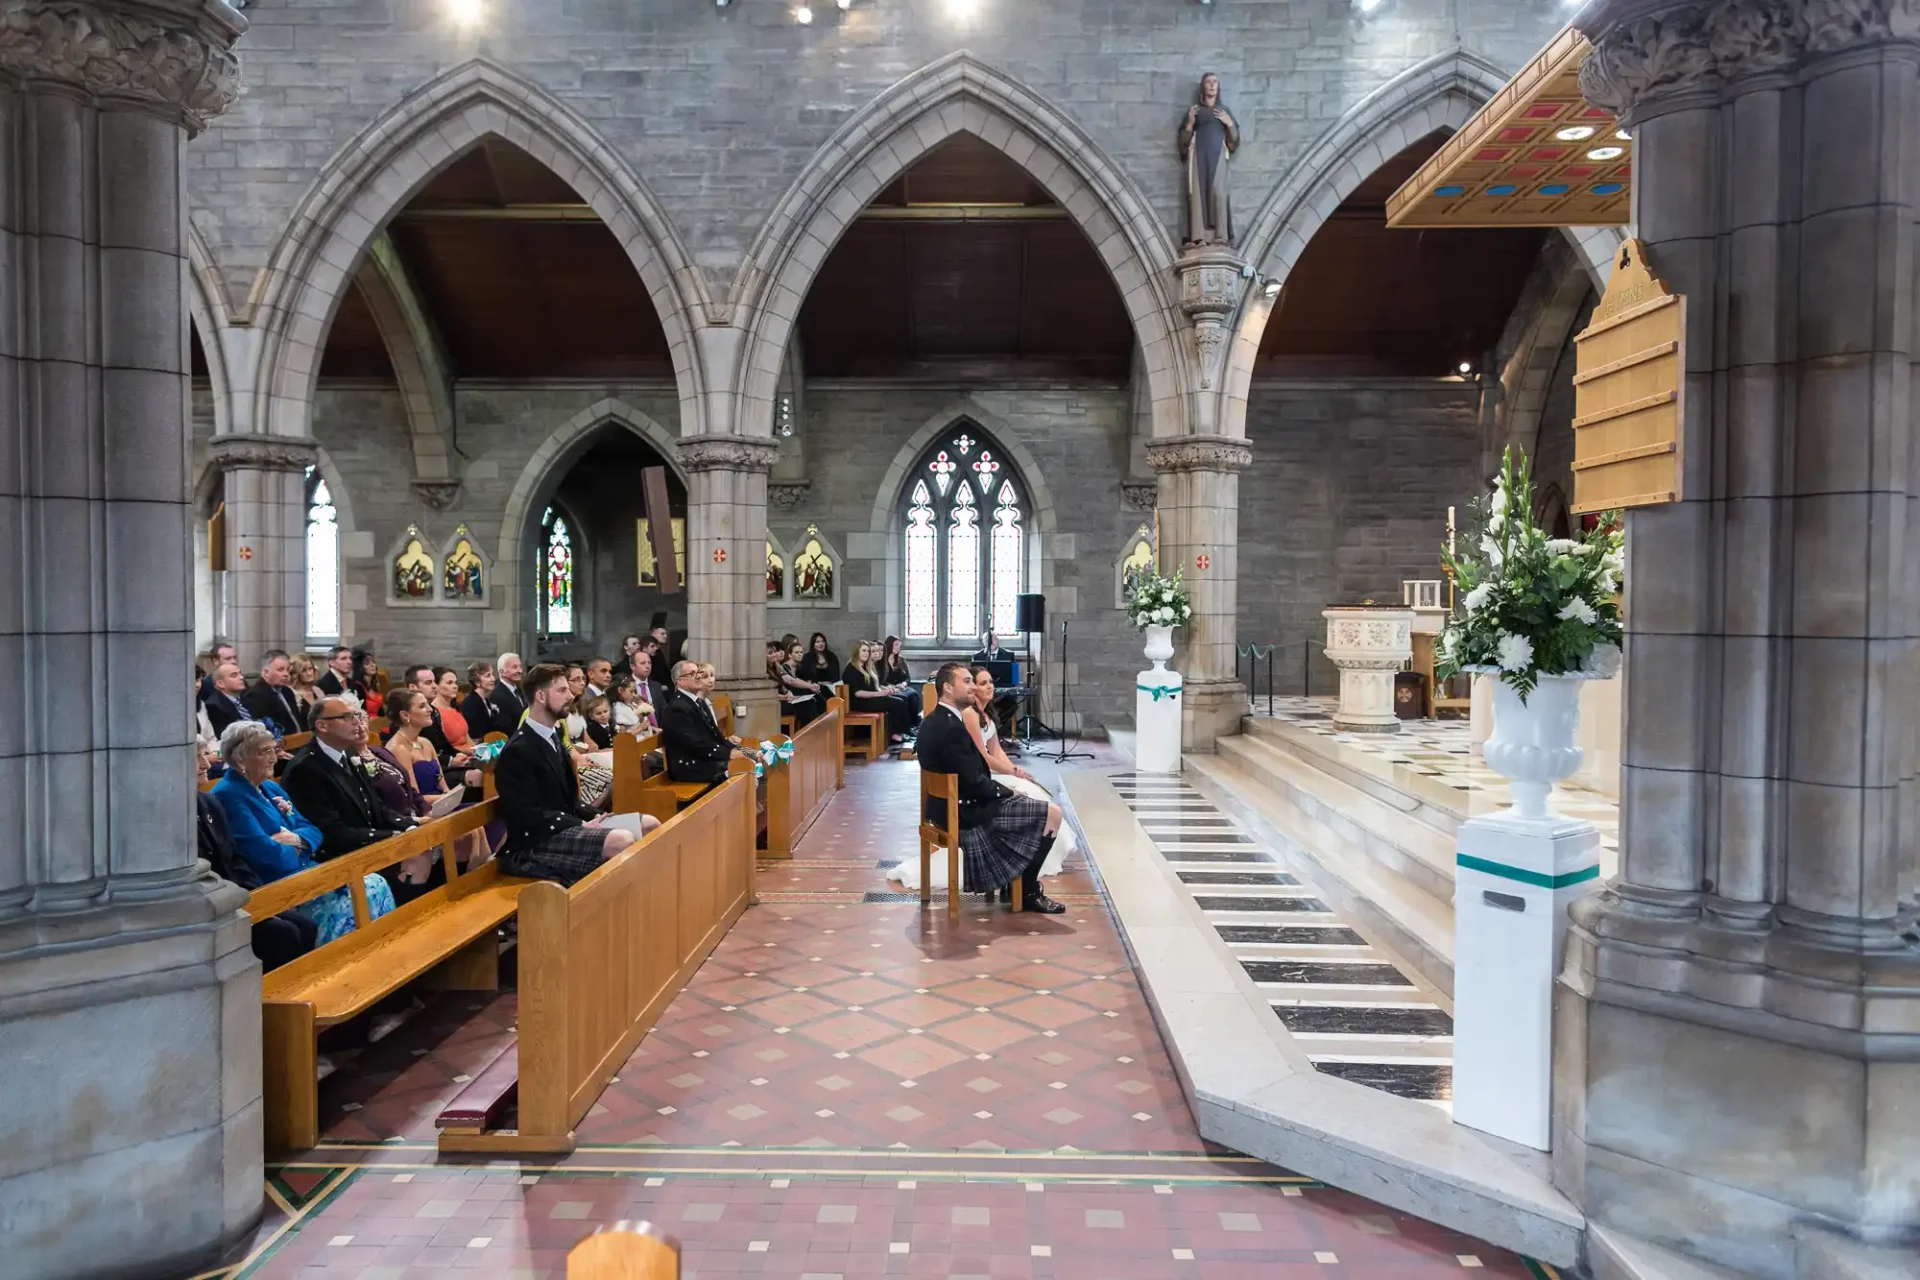 People attending a service inside a spacious church with stone arches and stained glass windows.